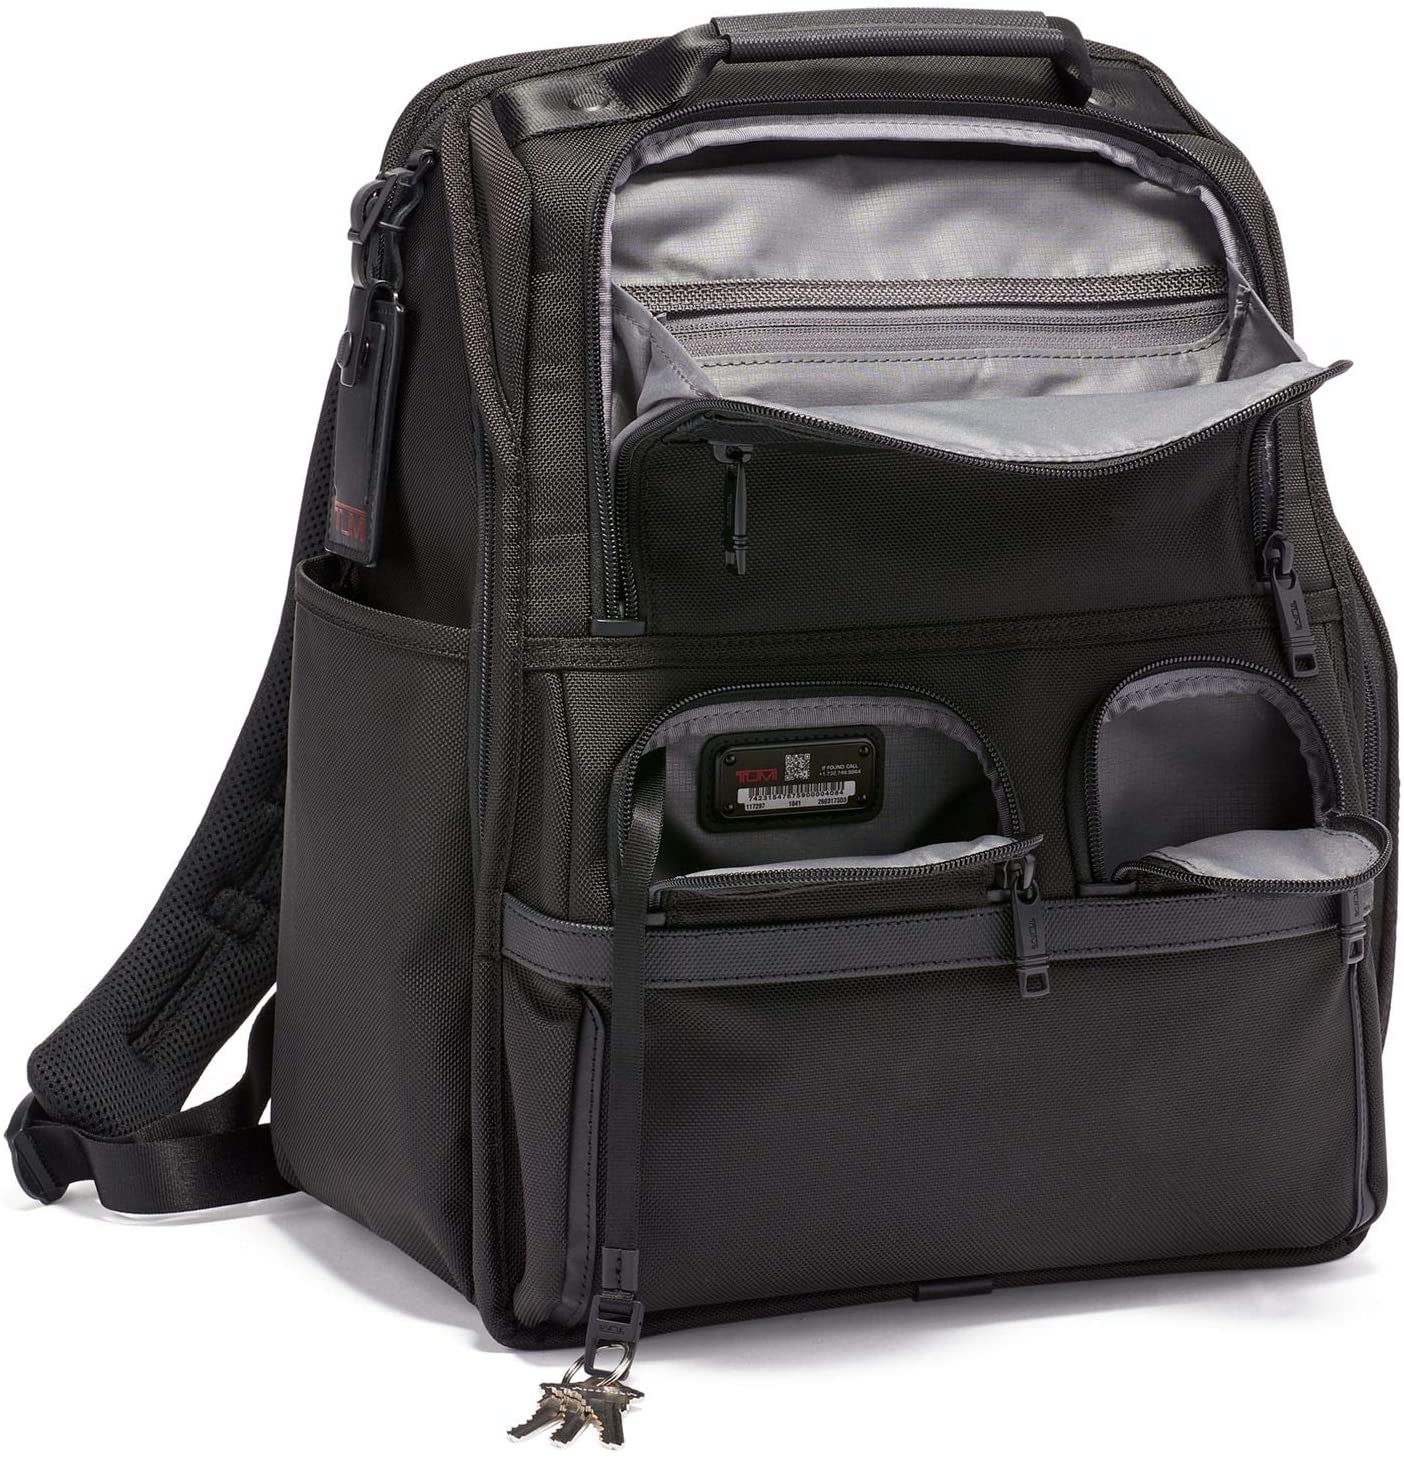 Alpha 3 backpack by TUMI